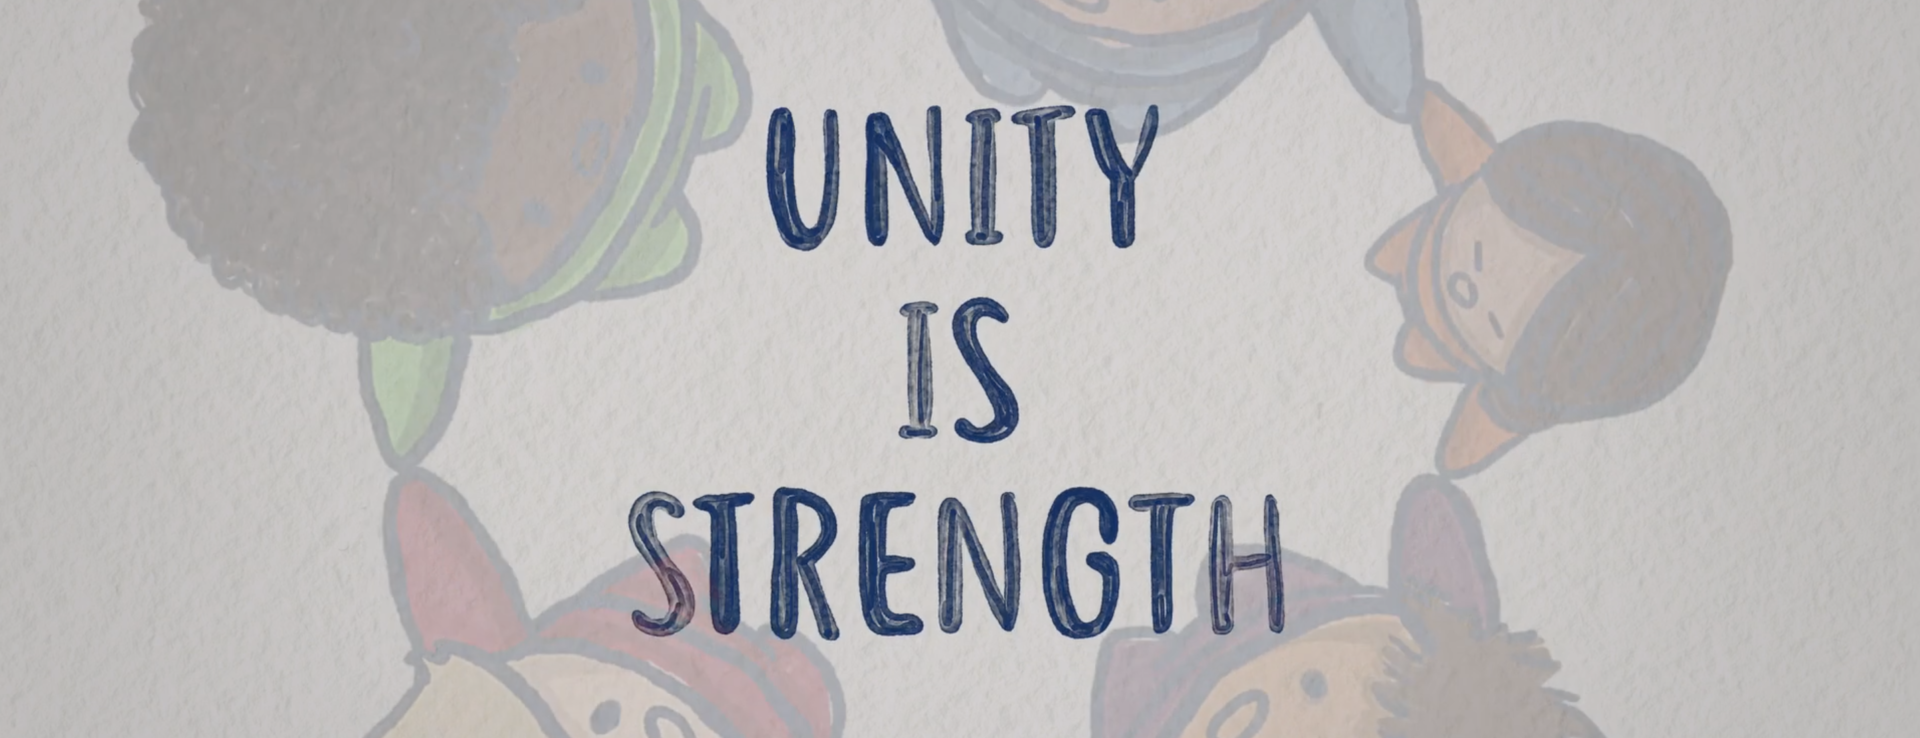 Unity is Strength shows cartoon style characters, holding hands together in a circle forming around the title. Unity is Strength